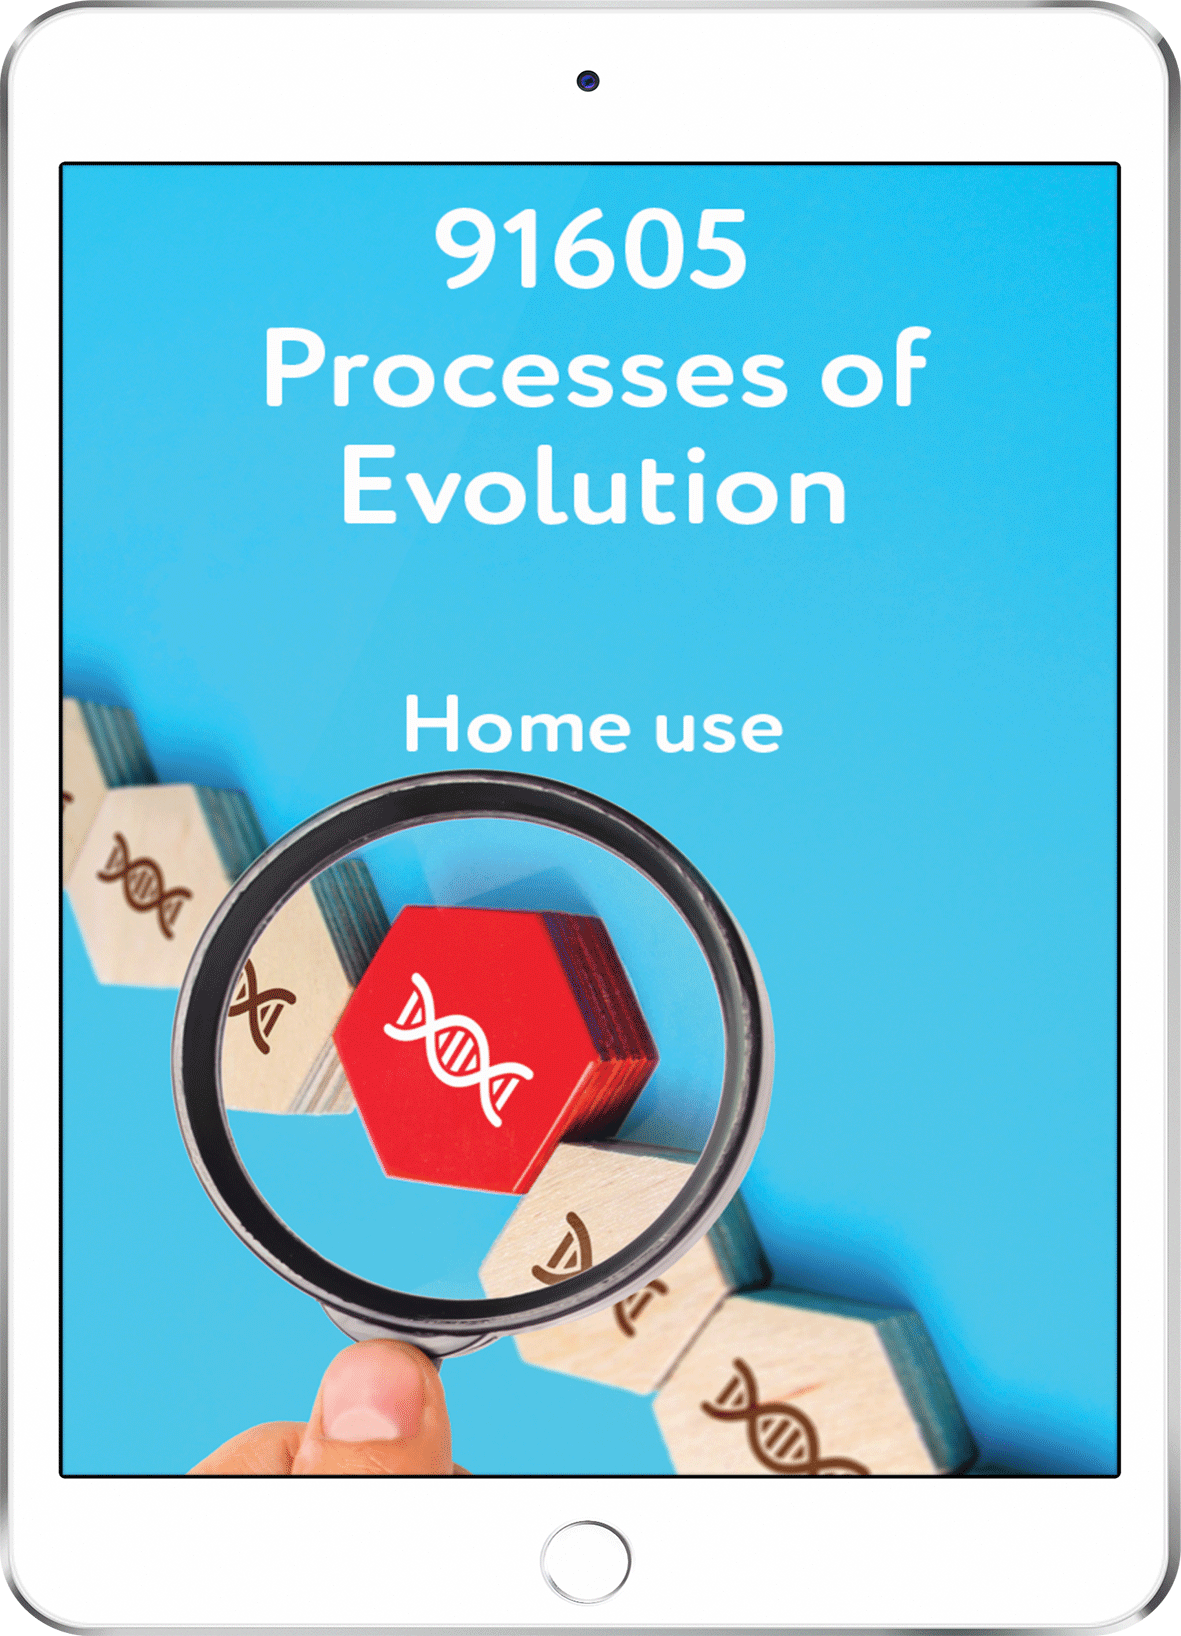 91605 Processes of Evolution - Home Use